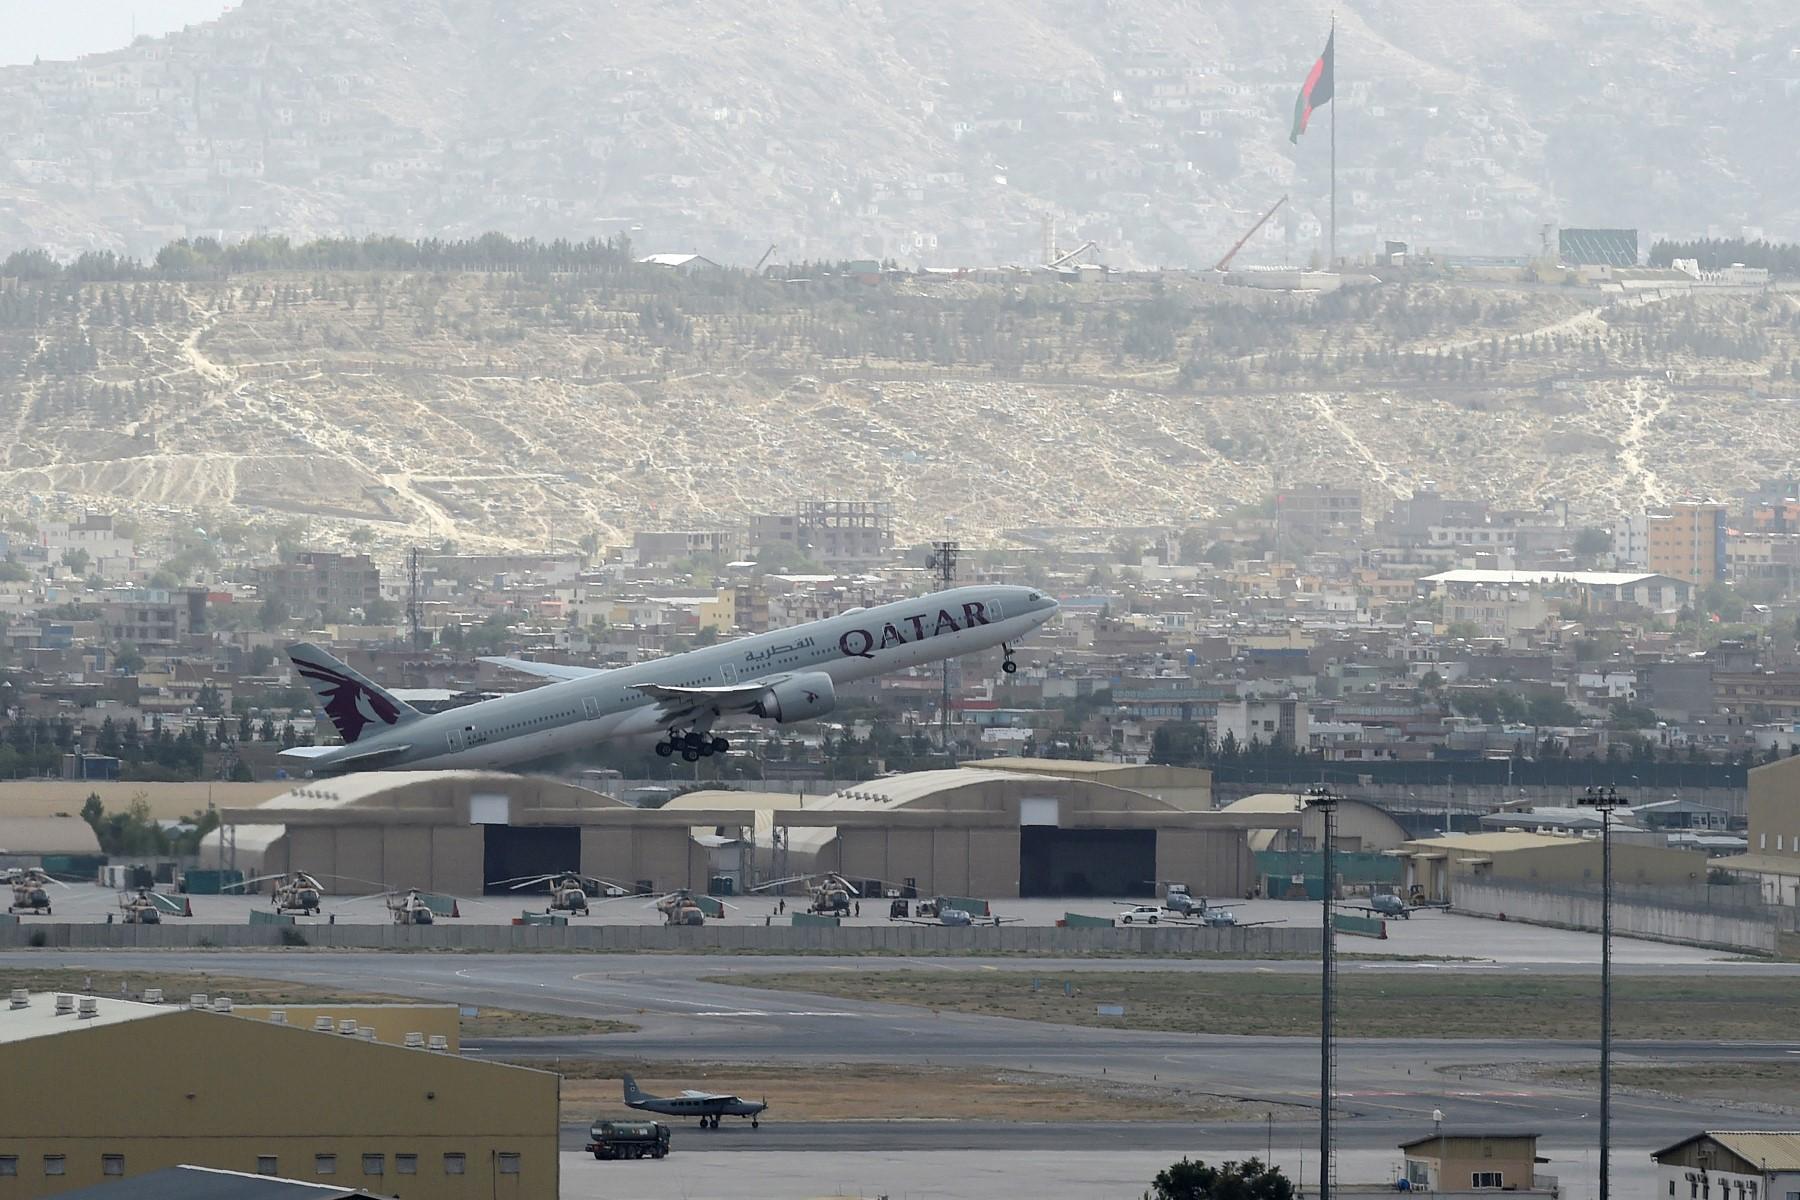 This picture taken on Aug 14, 2021 shows a Qatar Airways aircraft taking off from the airport in Kabul. Photo: AFP